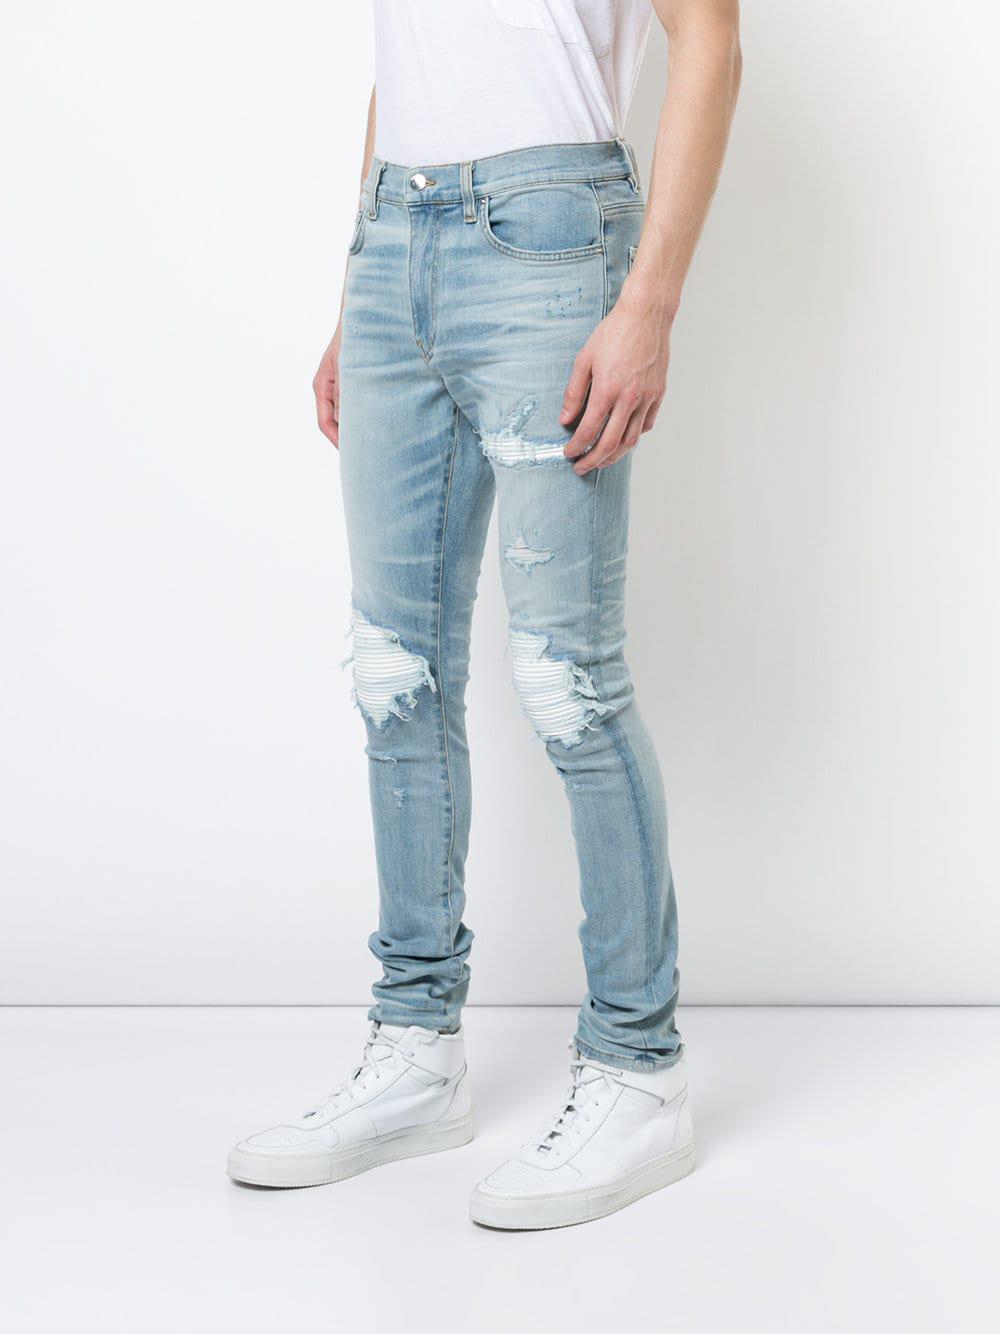 Amiri Mx1 Leather Patch Jeans in Blue for Men - Lyst